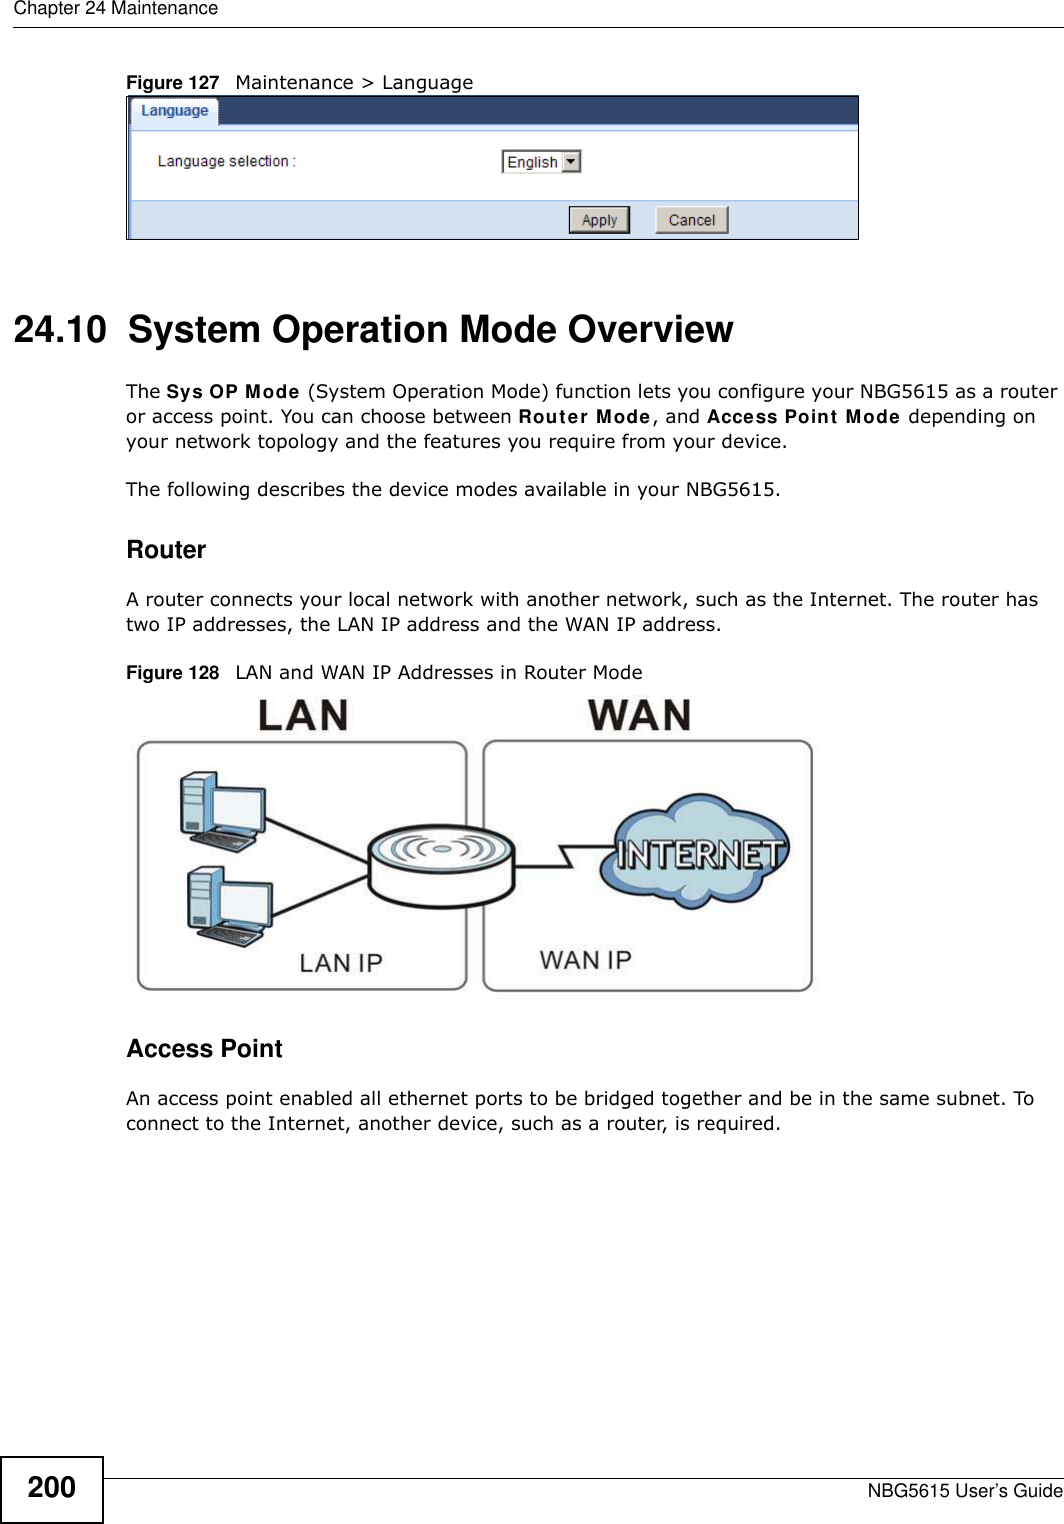 Chapter 24 MaintenanceNBG5615 User’s Guide200Figure 127   Maintenance &gt; Language 24.10  System Operation Mode OverviewThe Sys OP Mode (System Operation Mode) function lets you configure your NBG5615 as a router or access point. You can choose between Router Mode, and Access Point Mode depending on your network topology and the features you require from your device. The following describes the device modes available in your NBG5615.RouterA router connects your local network with another network, such as the Internet. The router has two IP addresses, the LAN IP address and the WAN IP address.Figure 128   LAN and WAN IP Addresses in Router ModeAccess PointAn access point enabled all ethernet ports to be bridged together and be in the same subnet. To connect to the Internet, another device, such as a router, is required.